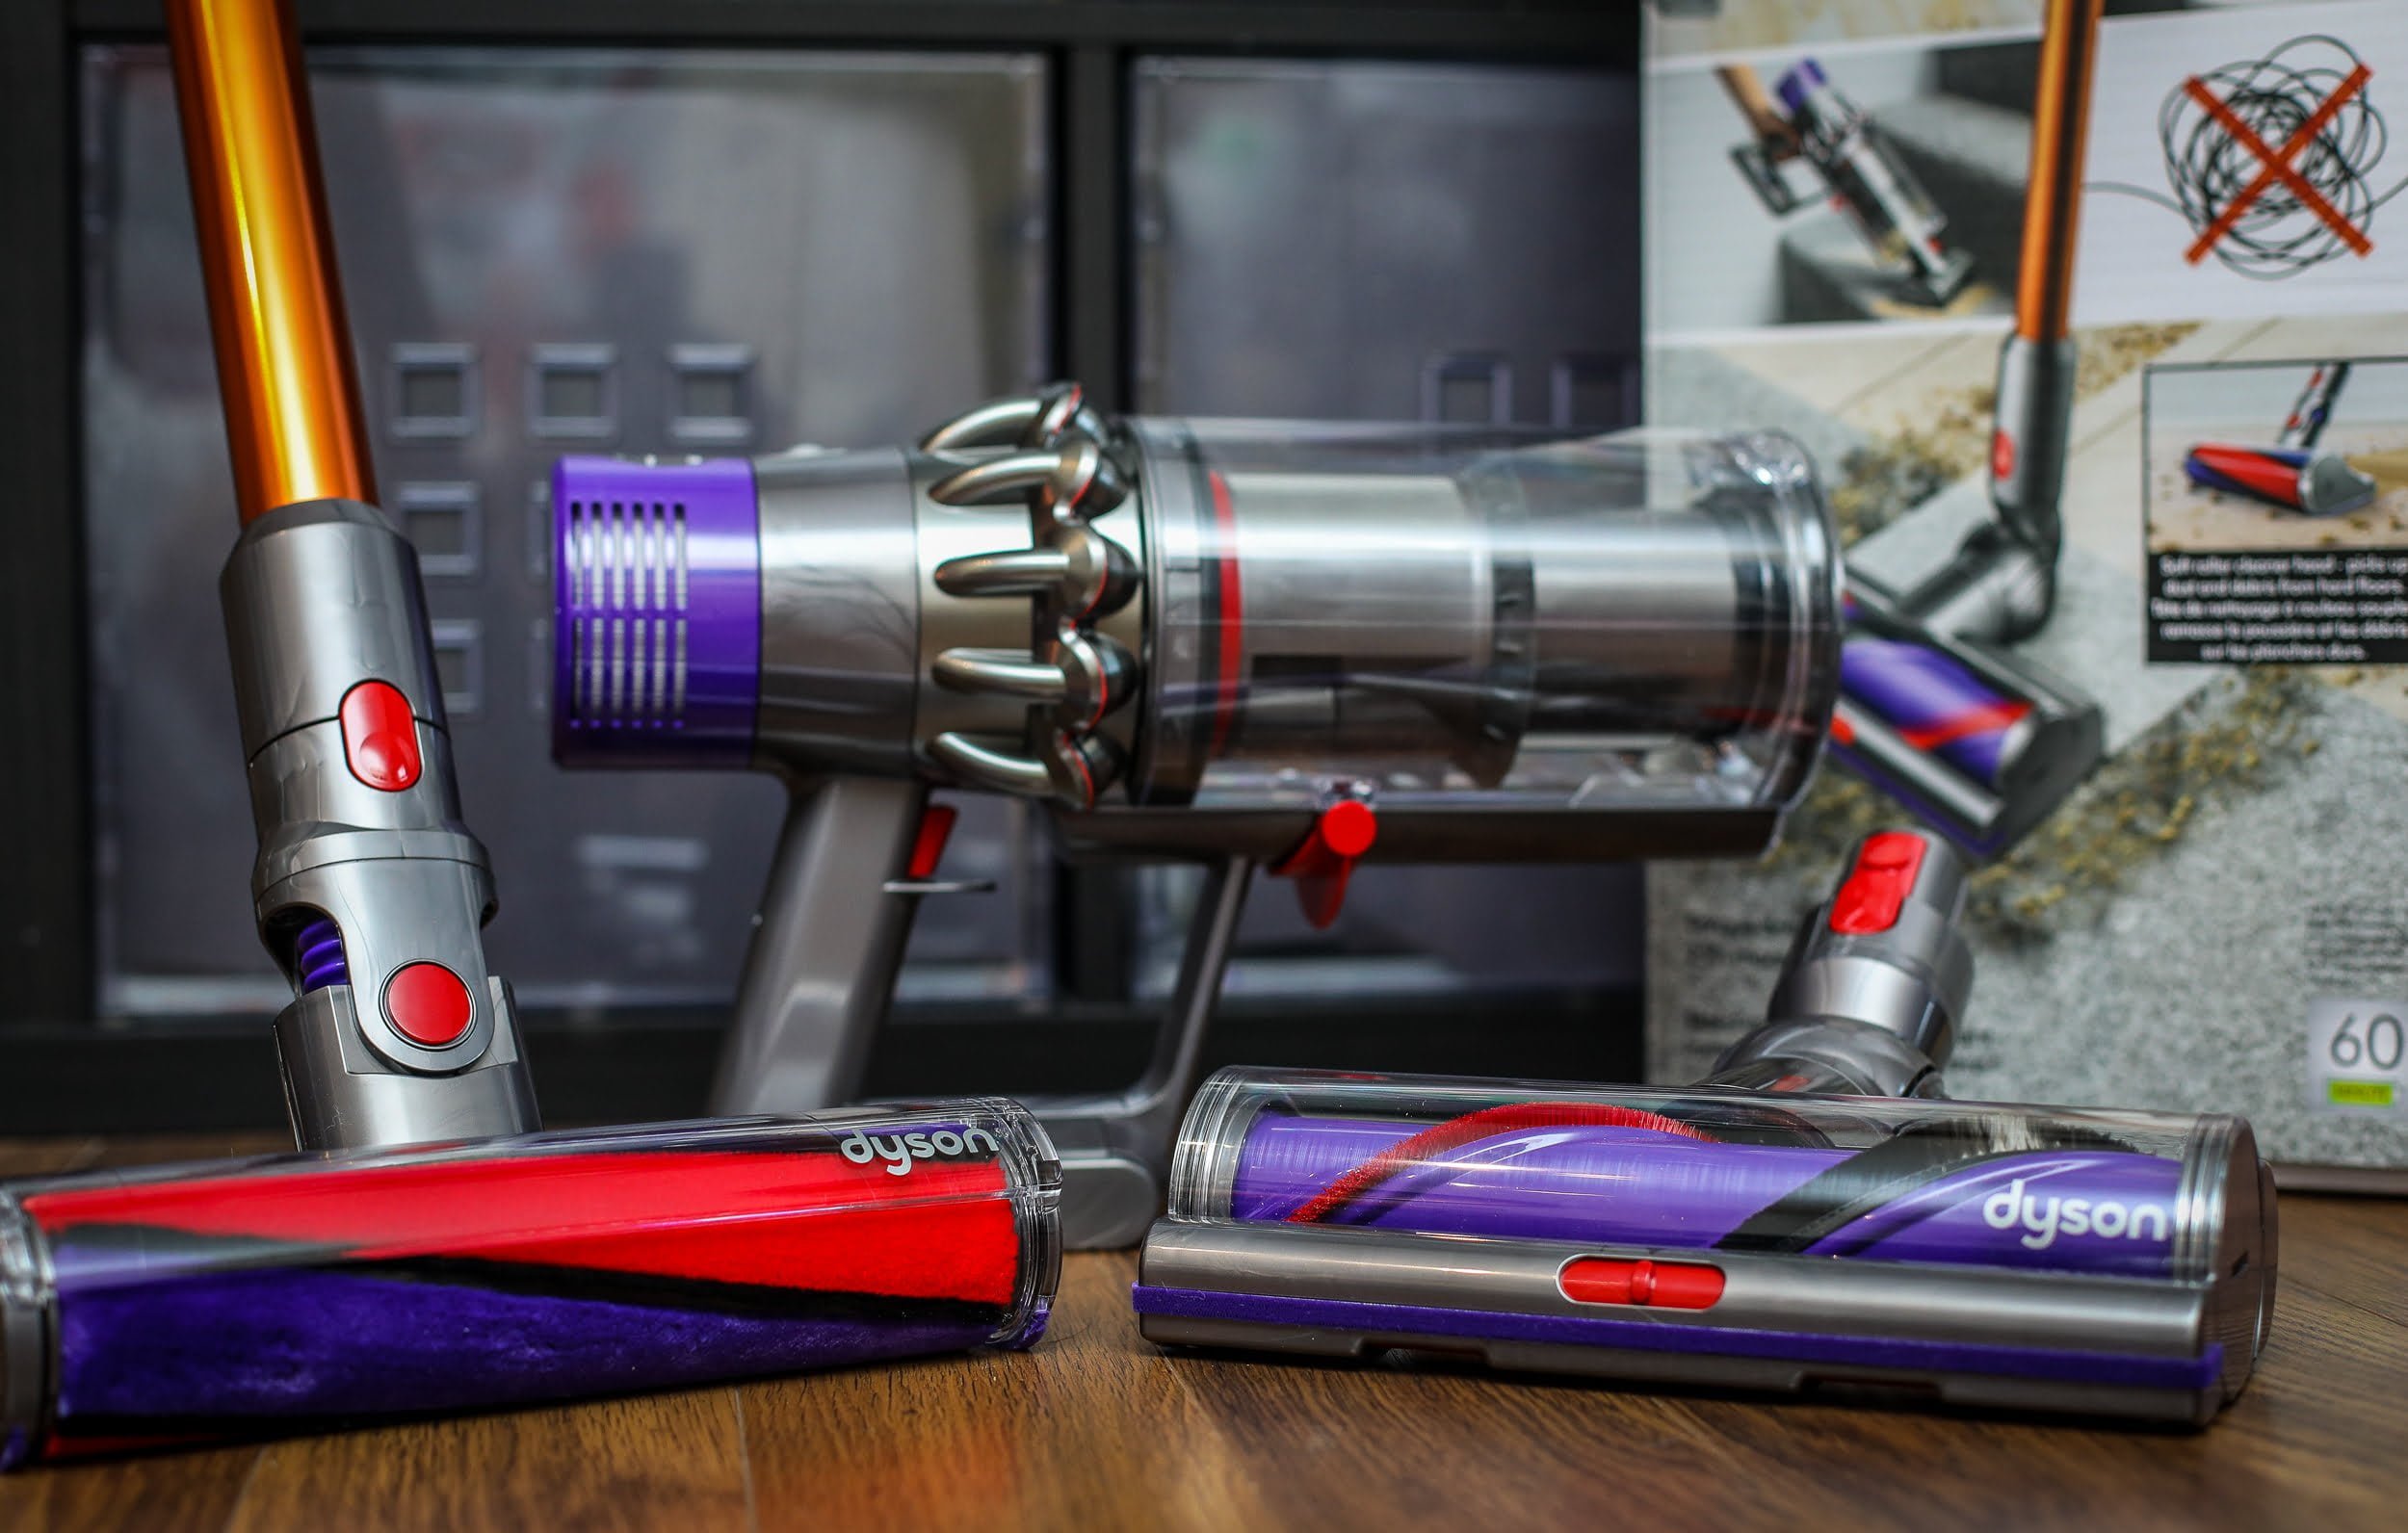 Whirlpool laver mad Kollektive Review: Dyson Cyclone V10 Absolute | The GATE